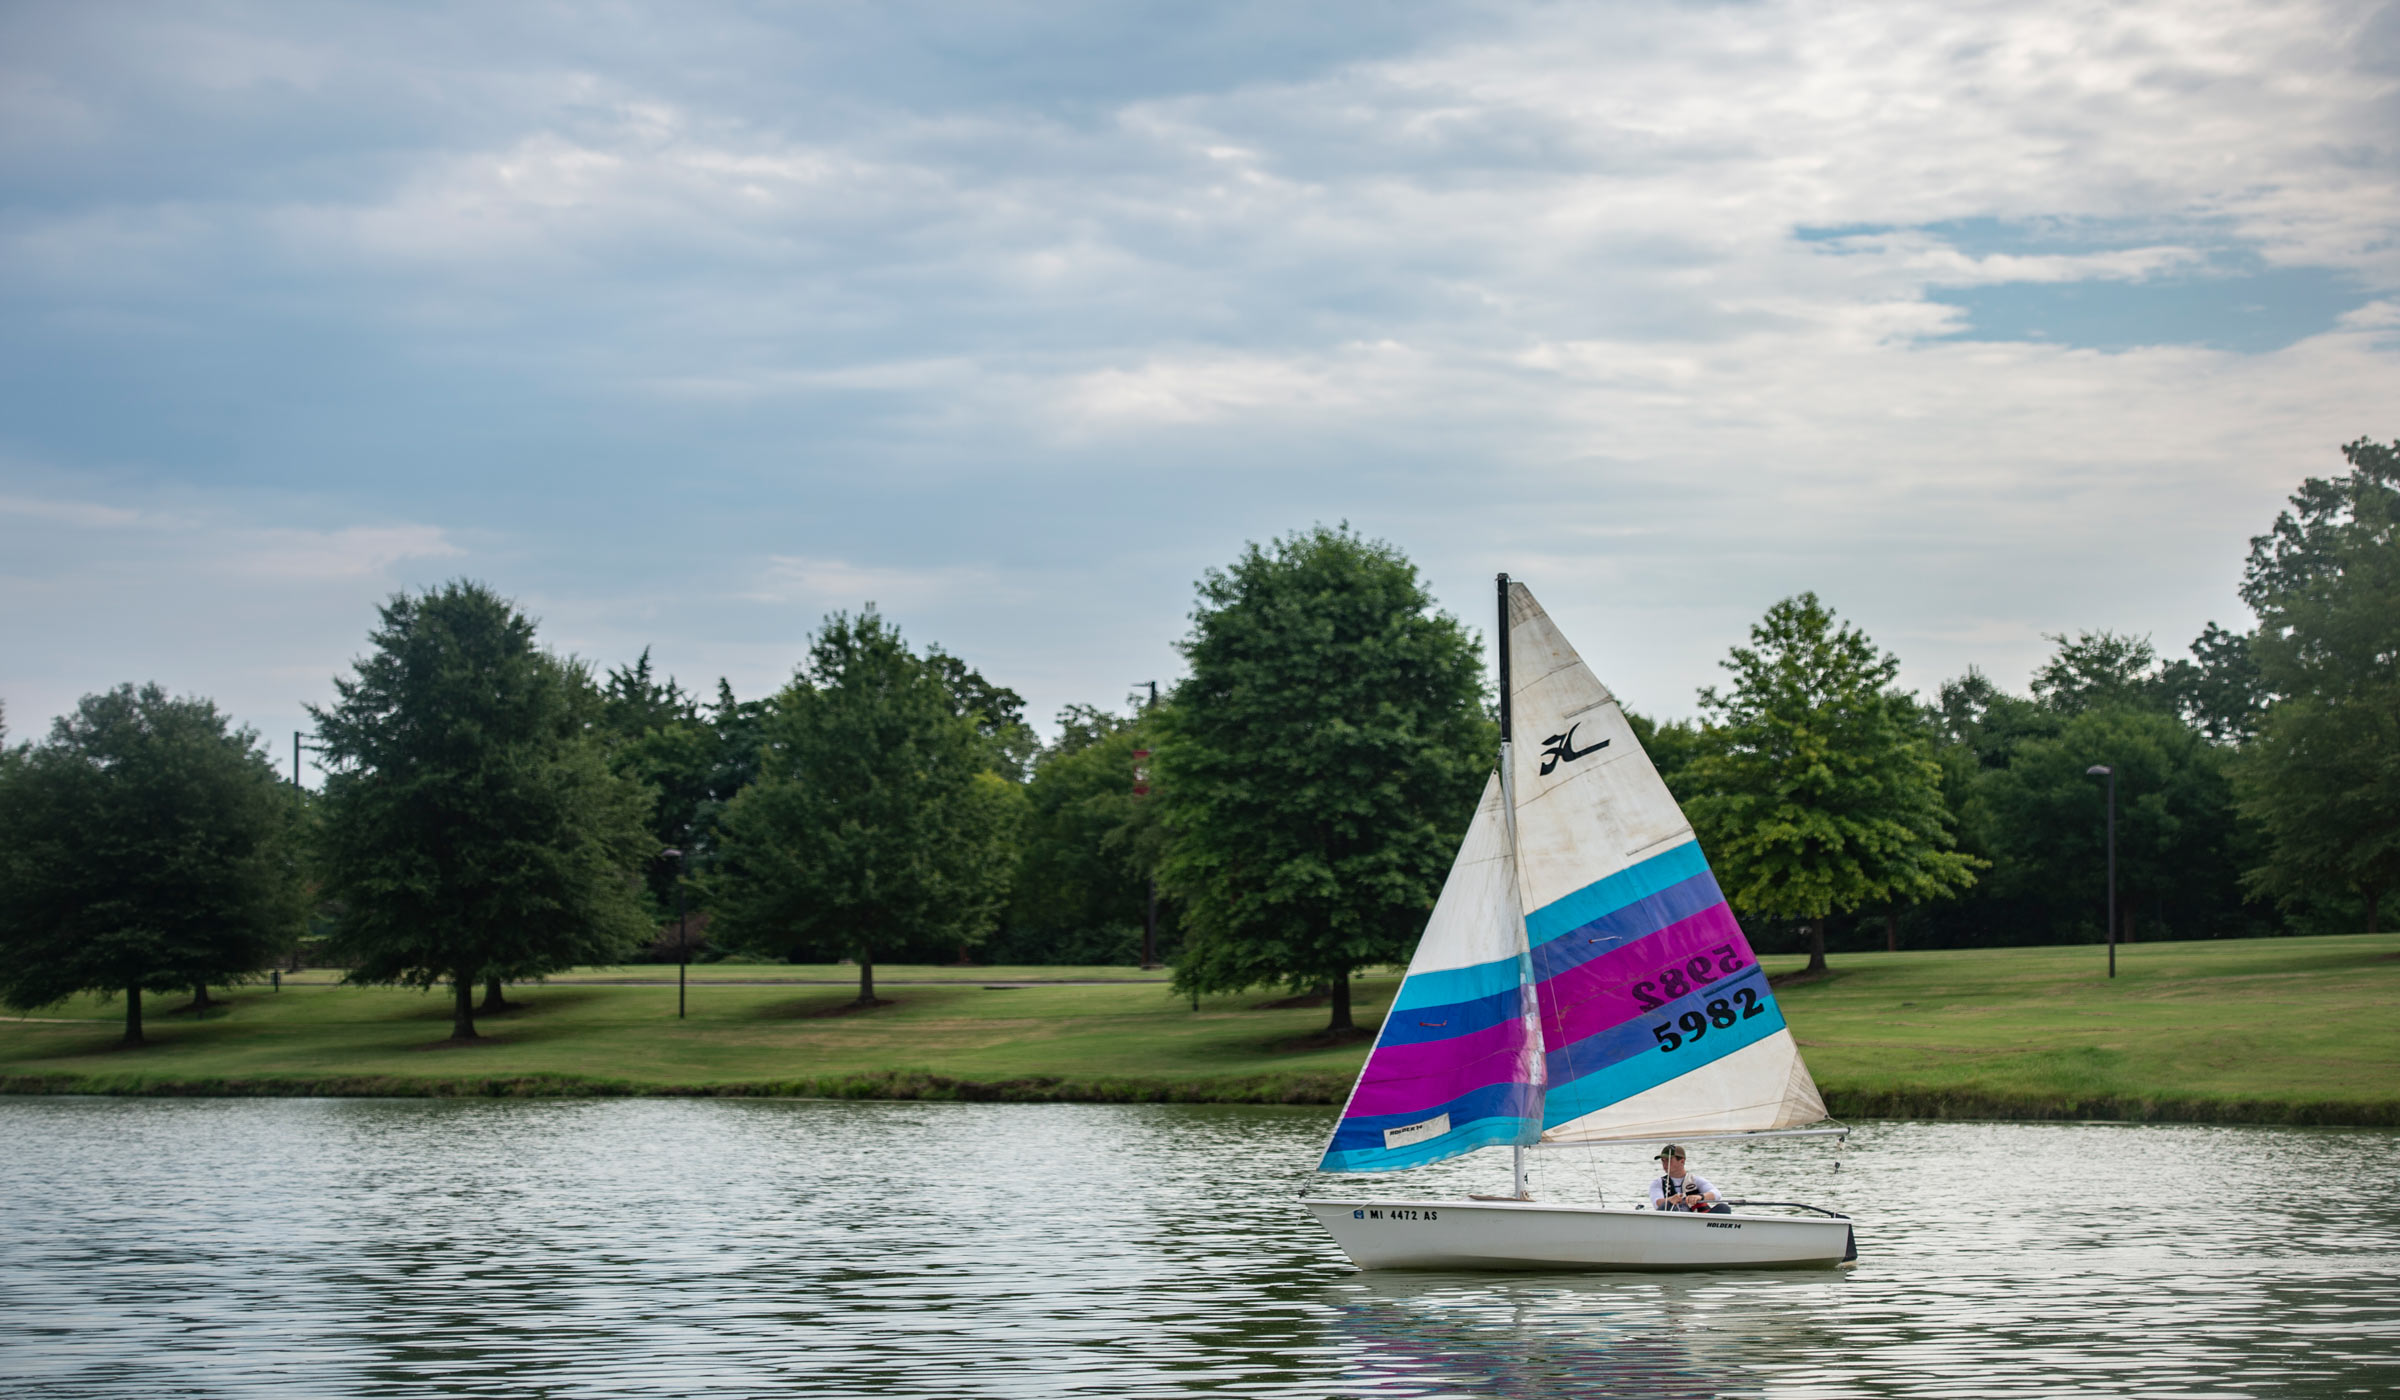 Sam Miller, a recent MSU graduate, takes a sailboat out on Chadwick Lake.